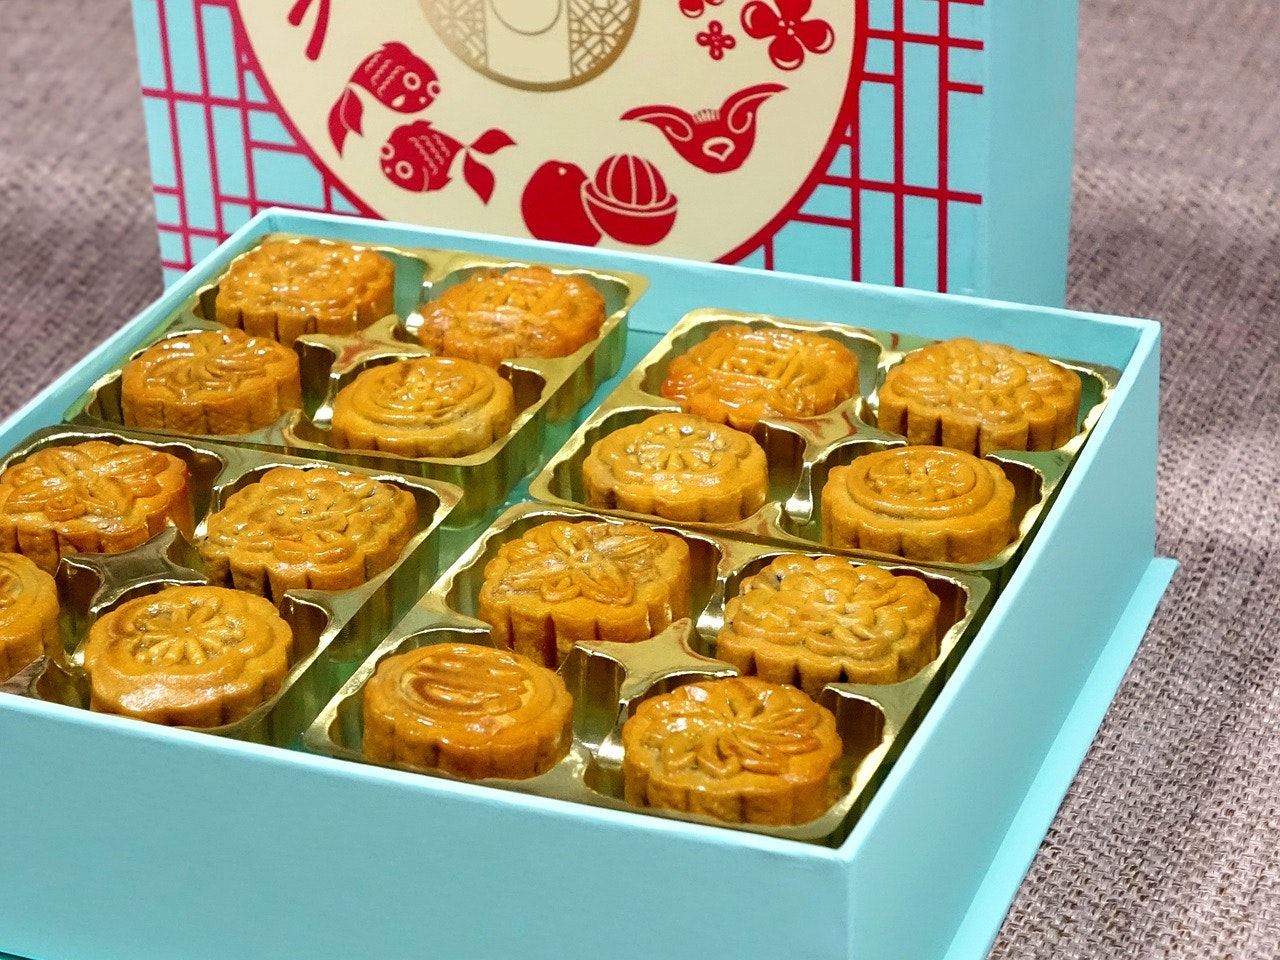 A box of mooncakes.